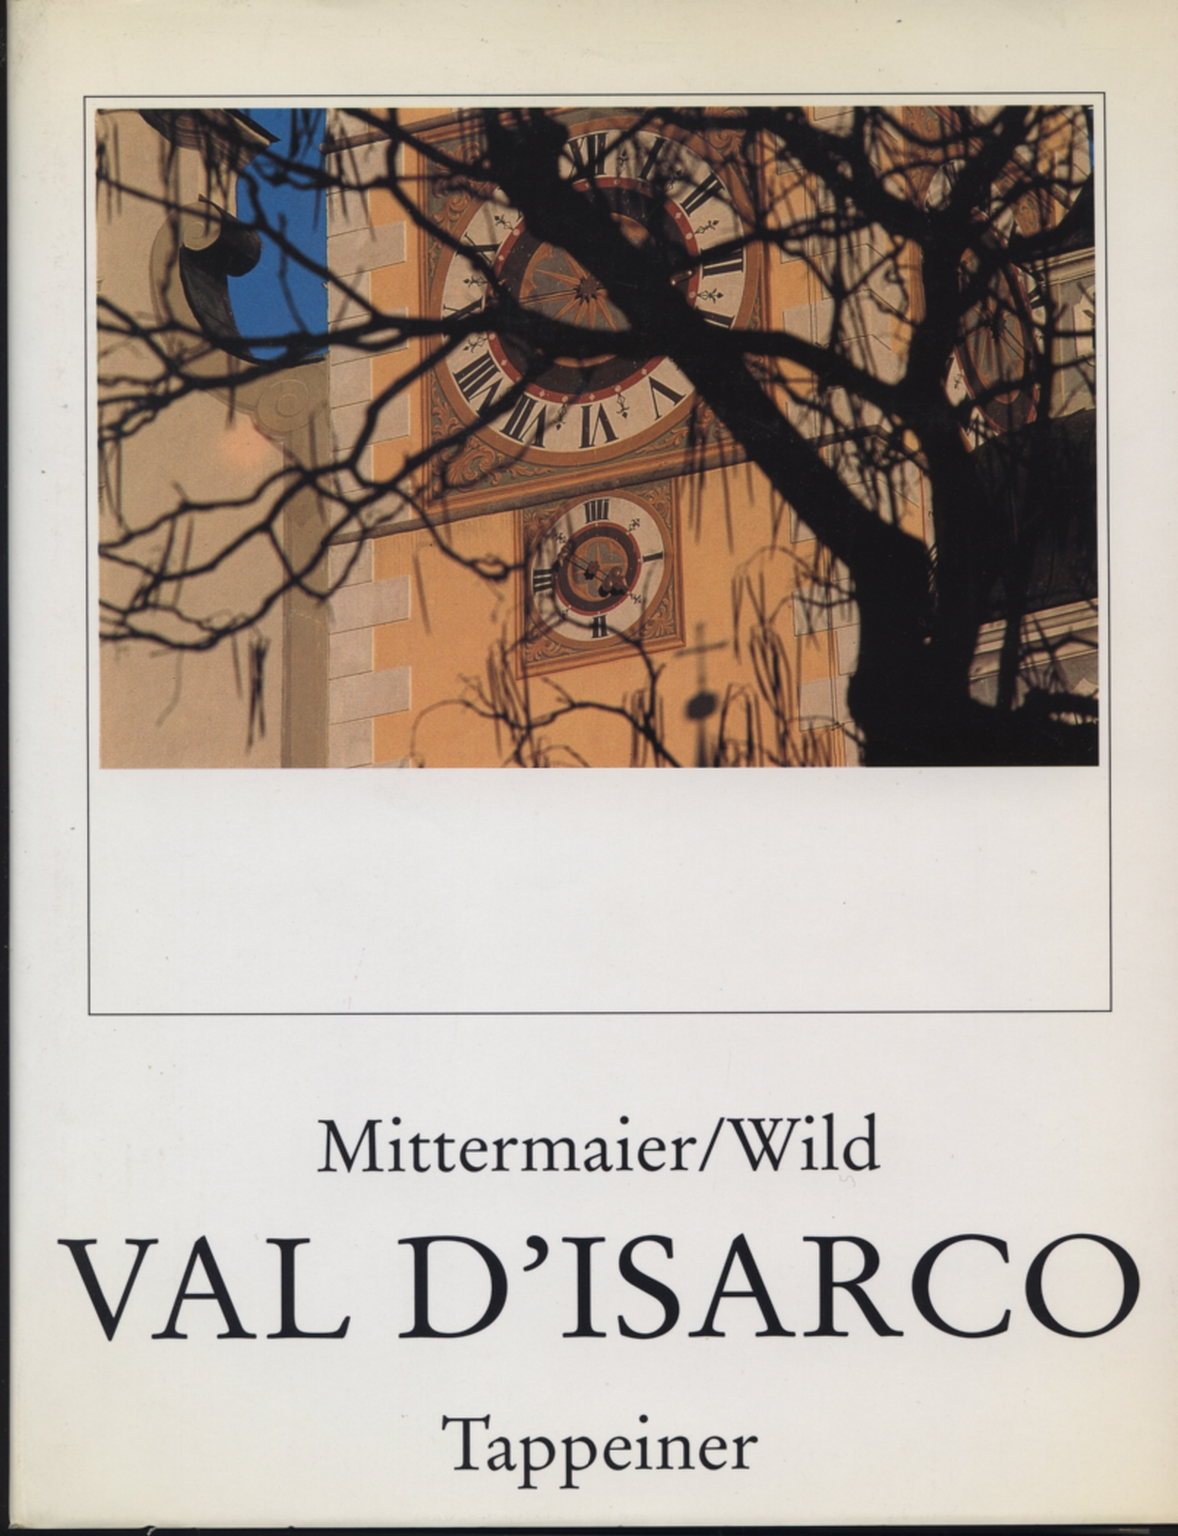 Val D'isarco, Karl Mittermaier, Carla Wild